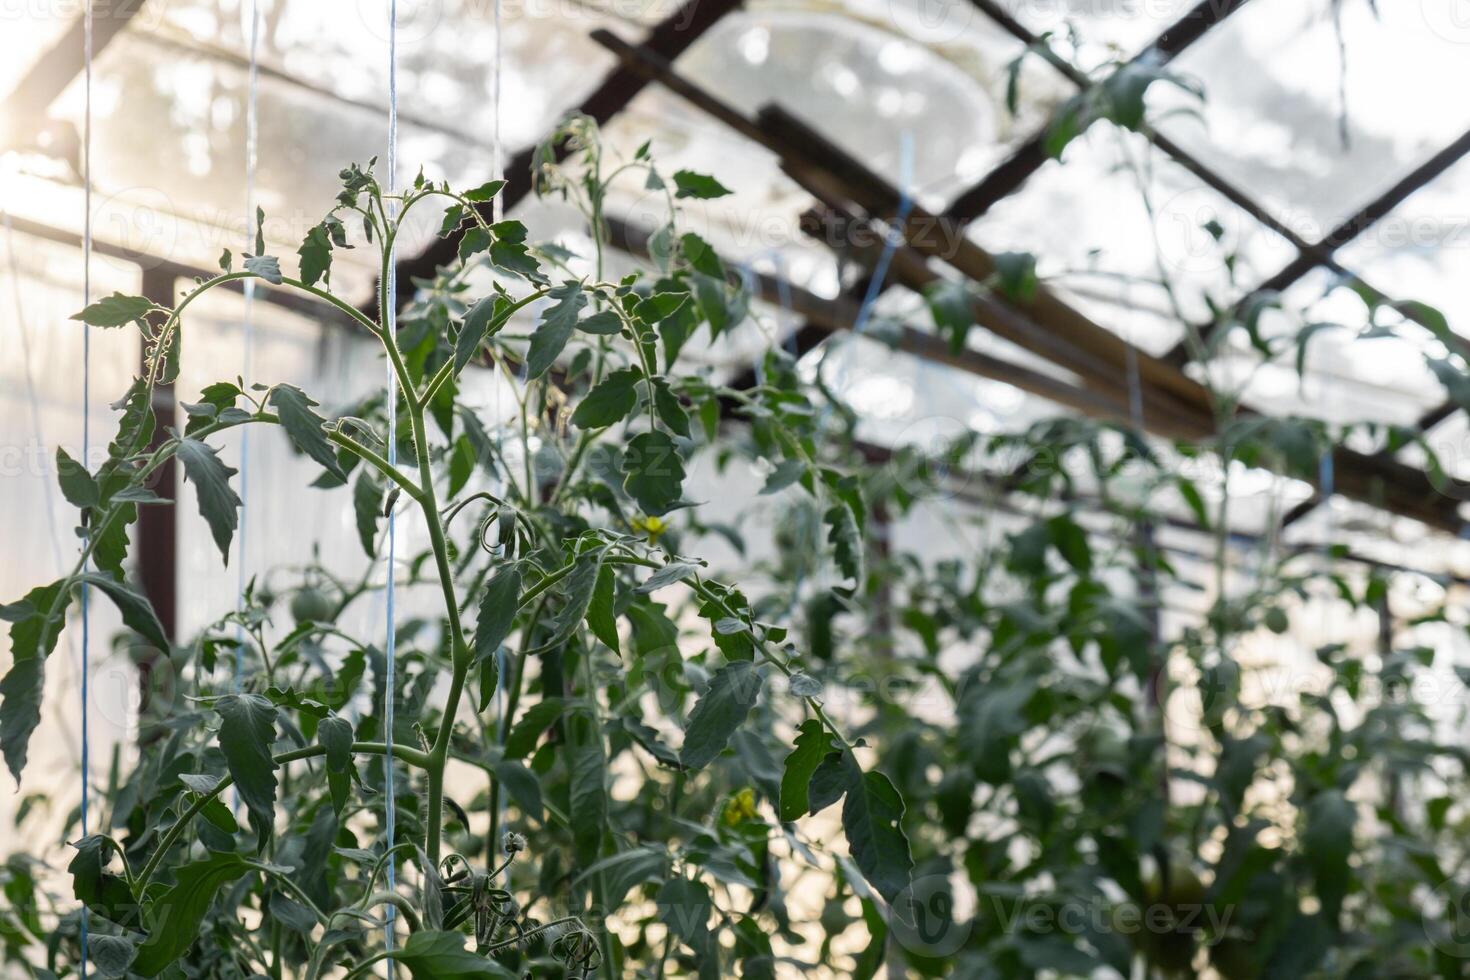 Cherry tomato harvest in greenhouse. Vegetable farmland ripe fresh tasty vegeculture food ingredients. Agriculture healthy cultivation concept photo